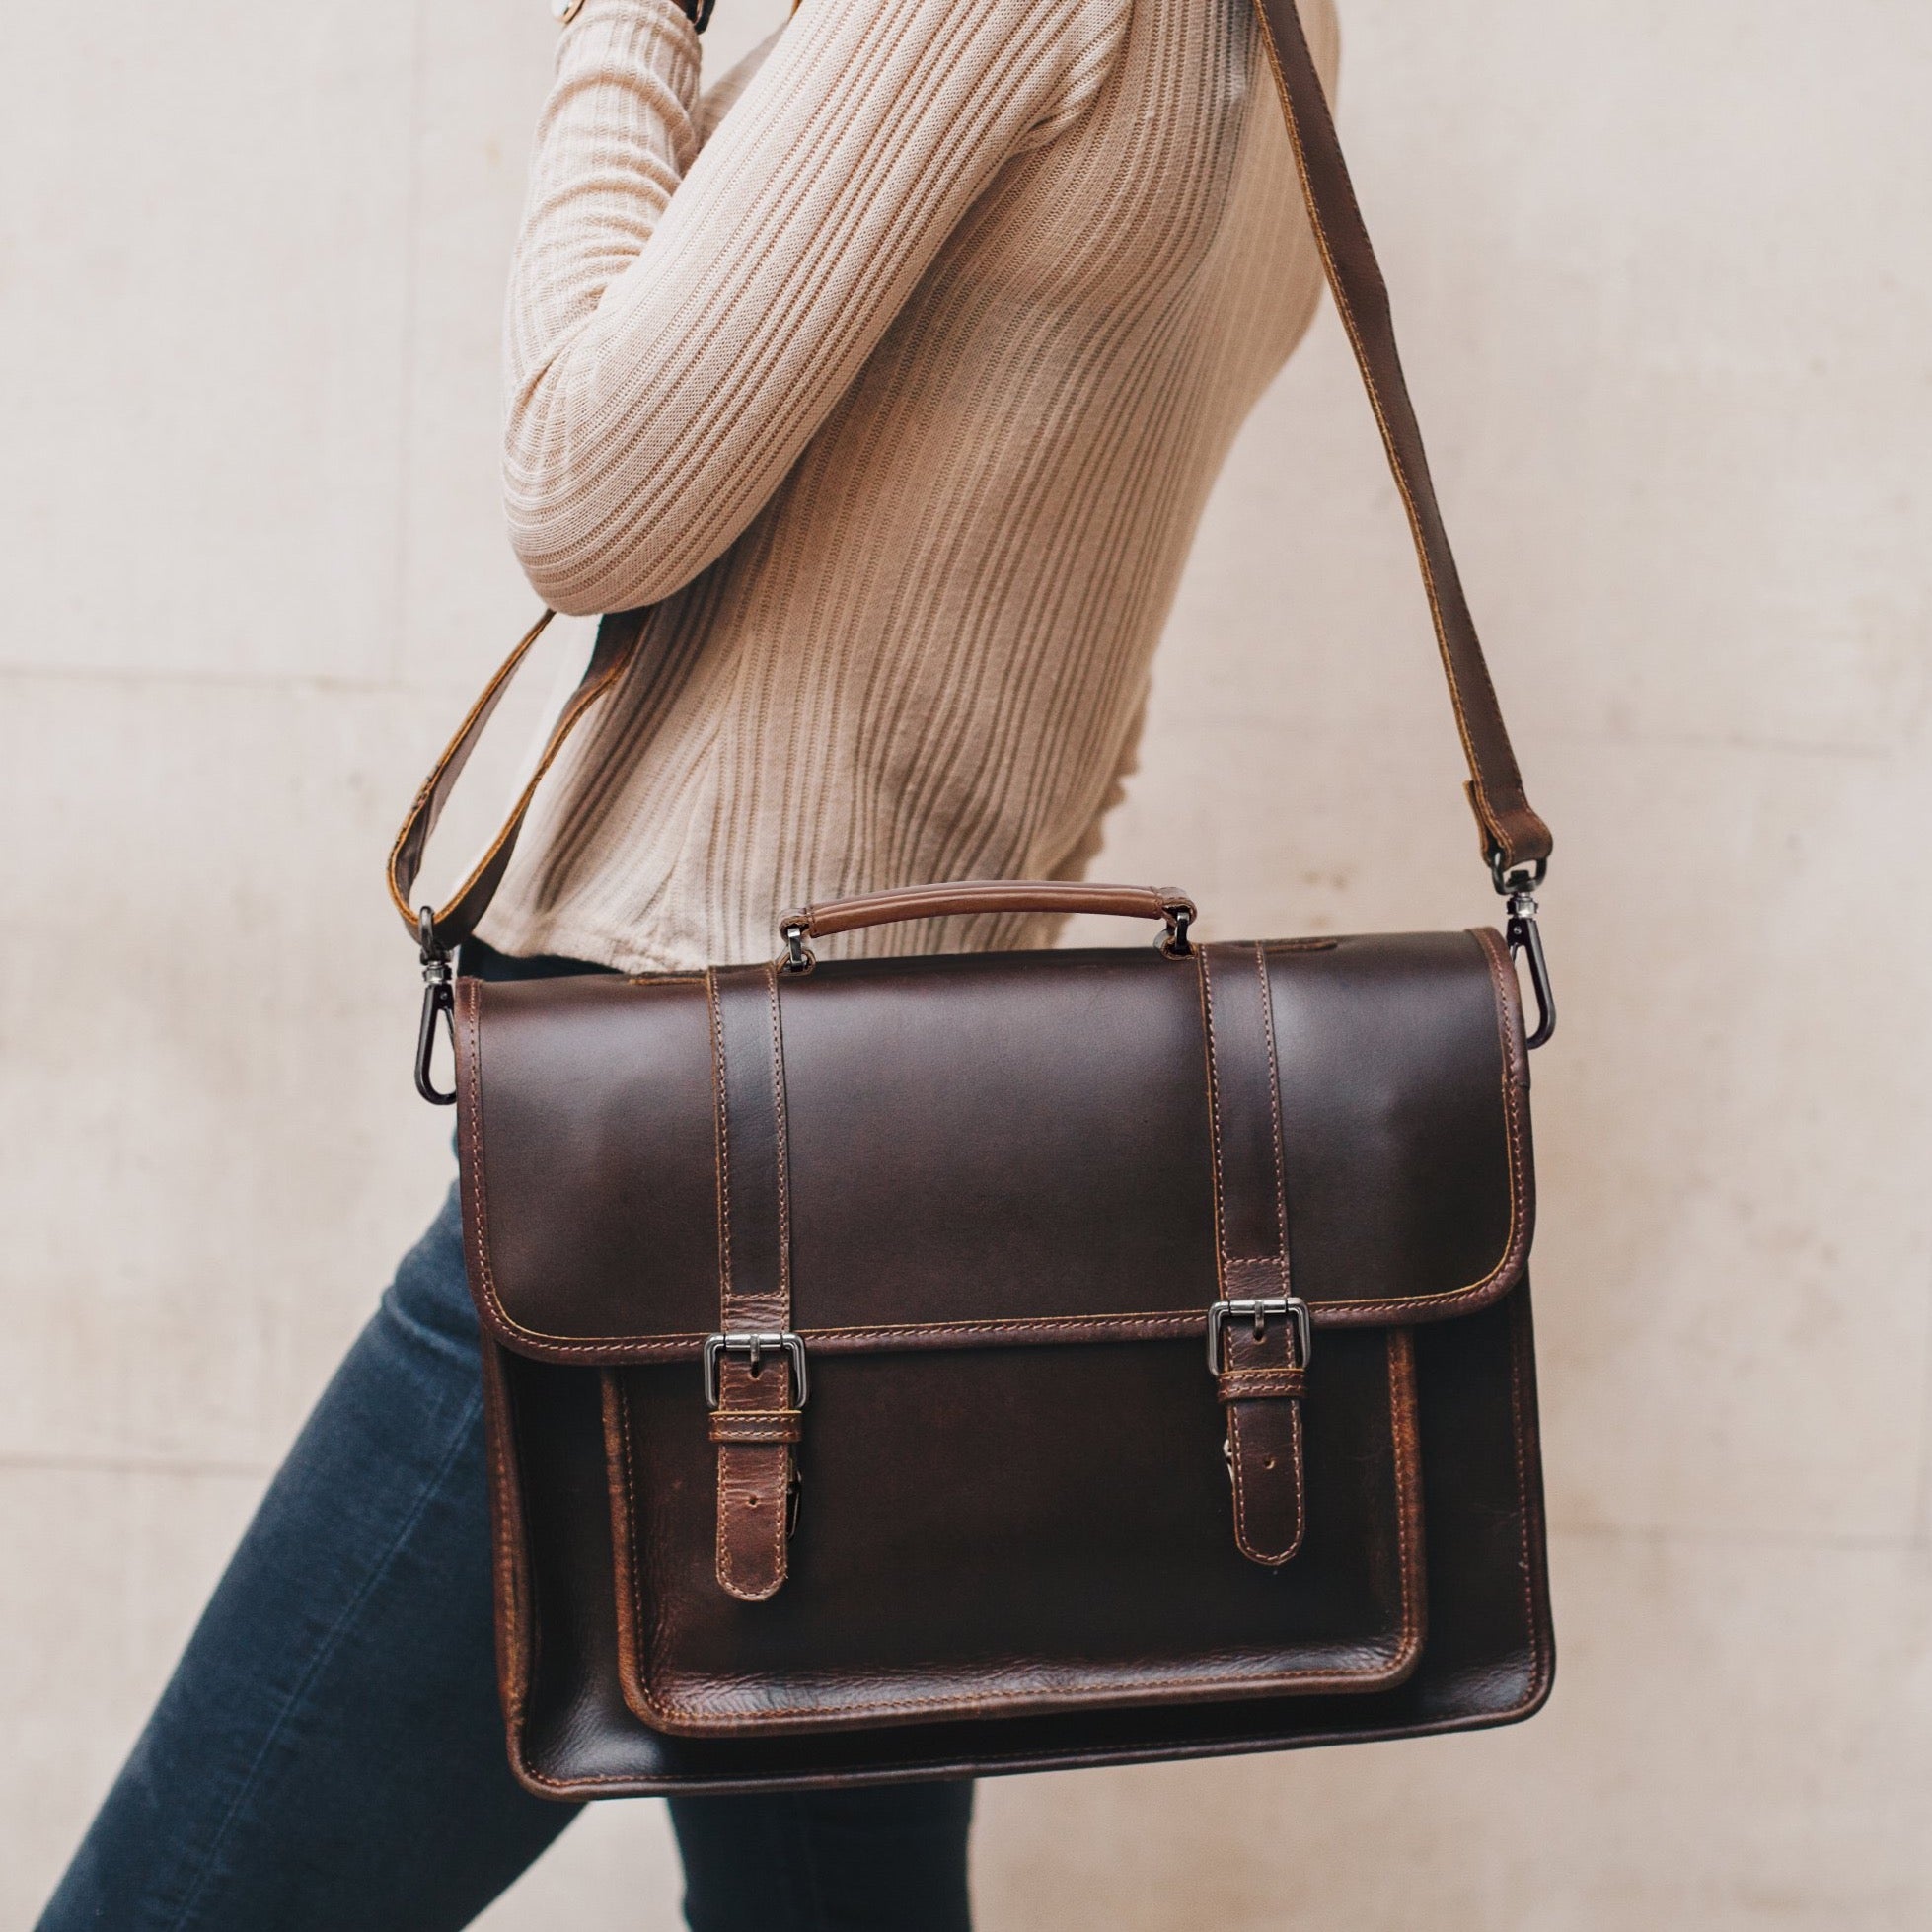 5 Key Features Of The Zatchels Black Leather Satchel Backpack